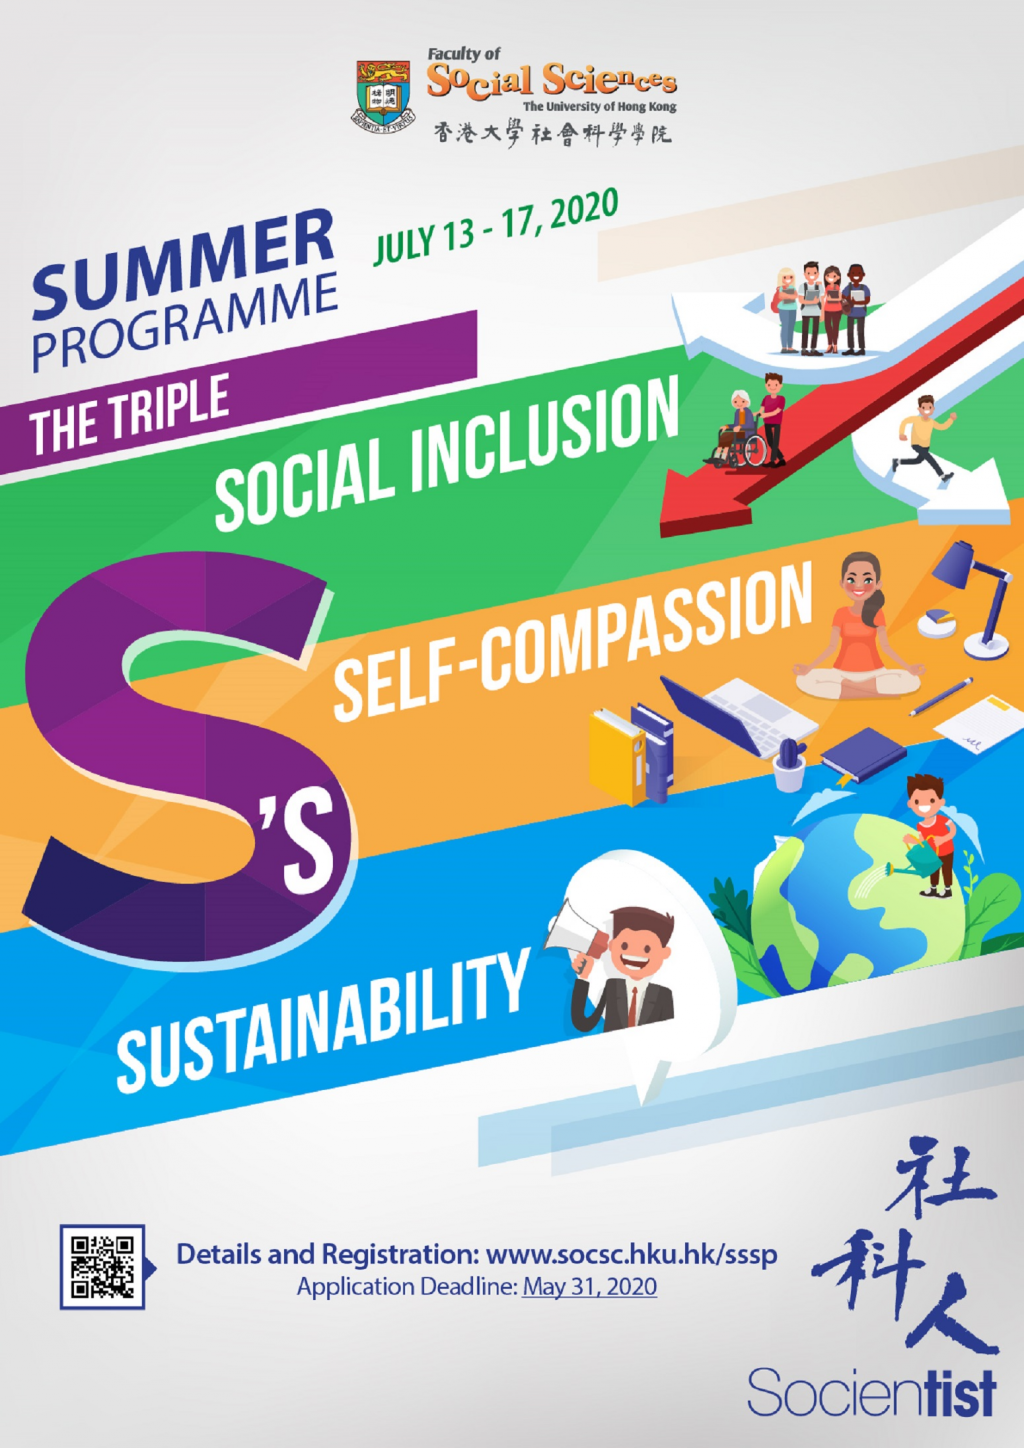 Social Sciences Summer Programme 2020: The Triple S's (July 13 - 17, 2020)